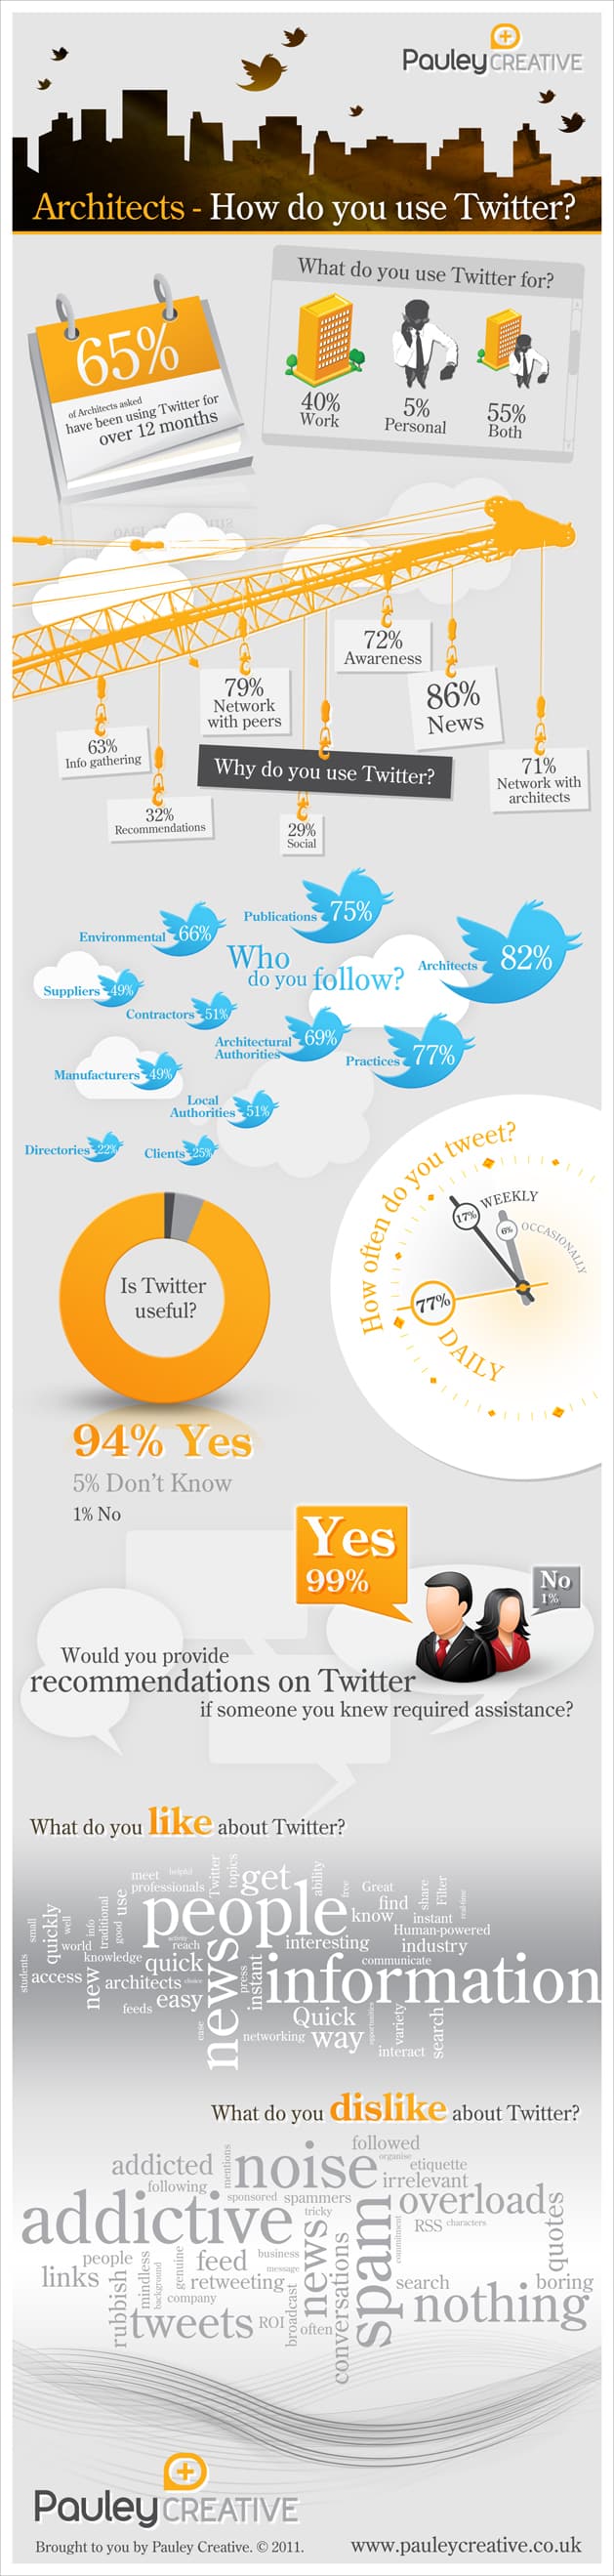 how_do_architects_use_Twitter_infographic